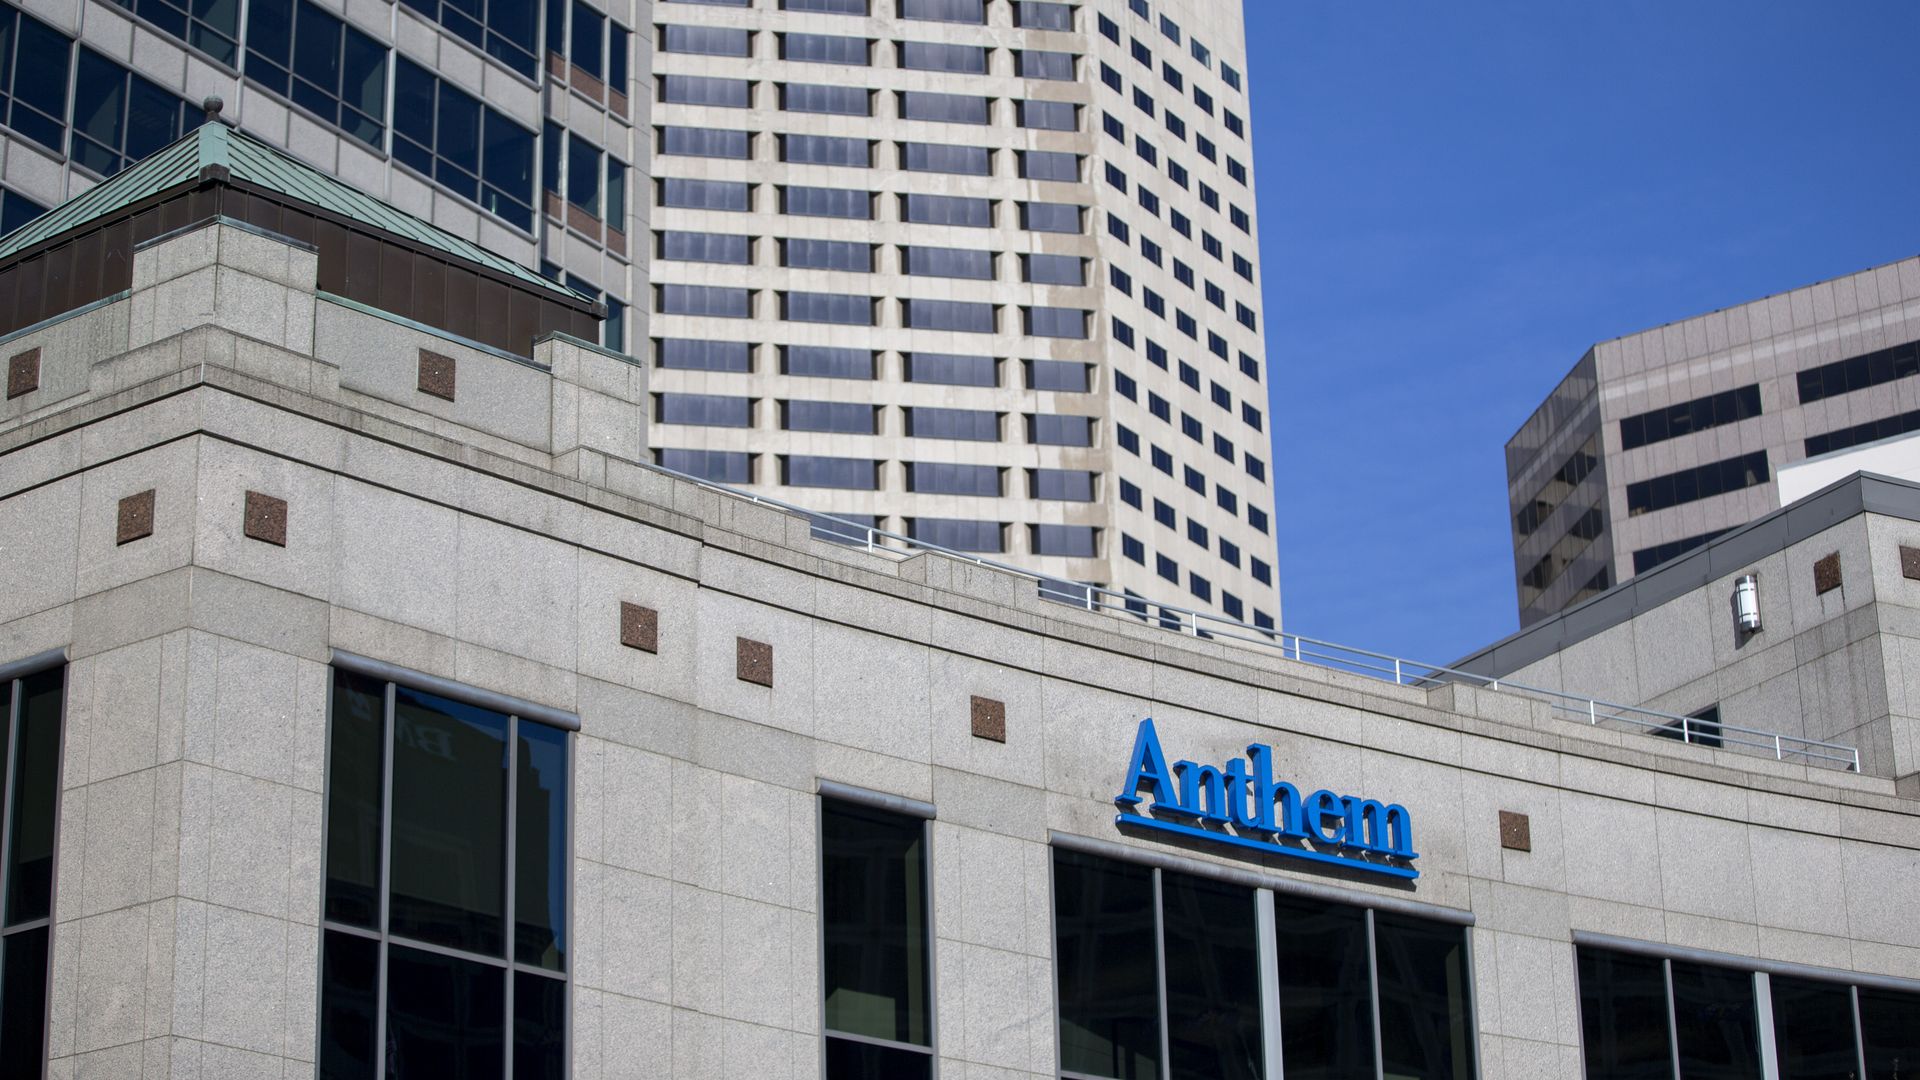 Anthem's blue logo on its gray headquarters building.